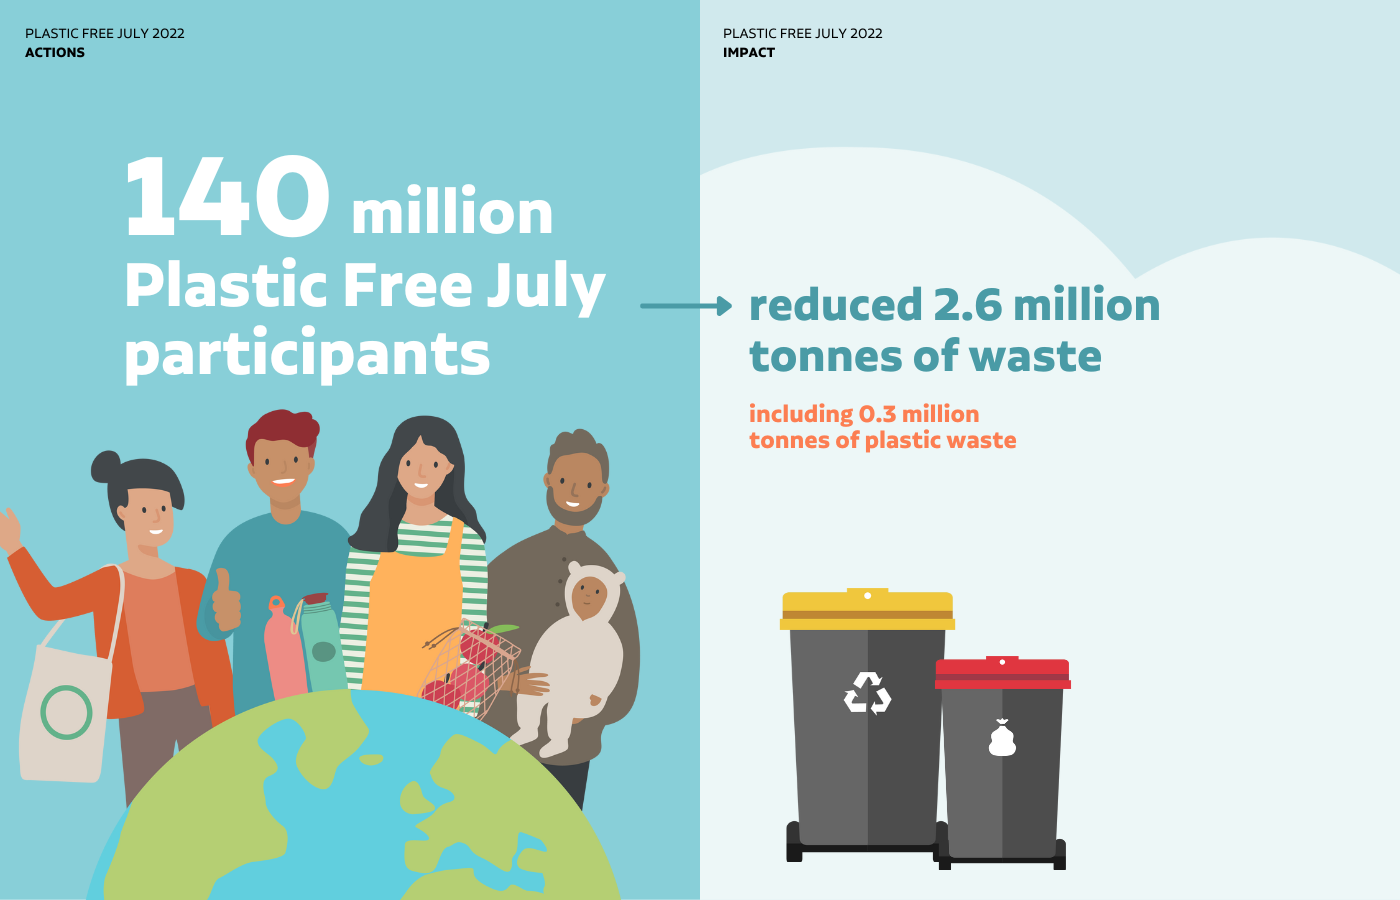 https://www.plasticfreejuly.org/wp-content/uploads/2022/11/PFJ-Annual-Report-Infographic.png